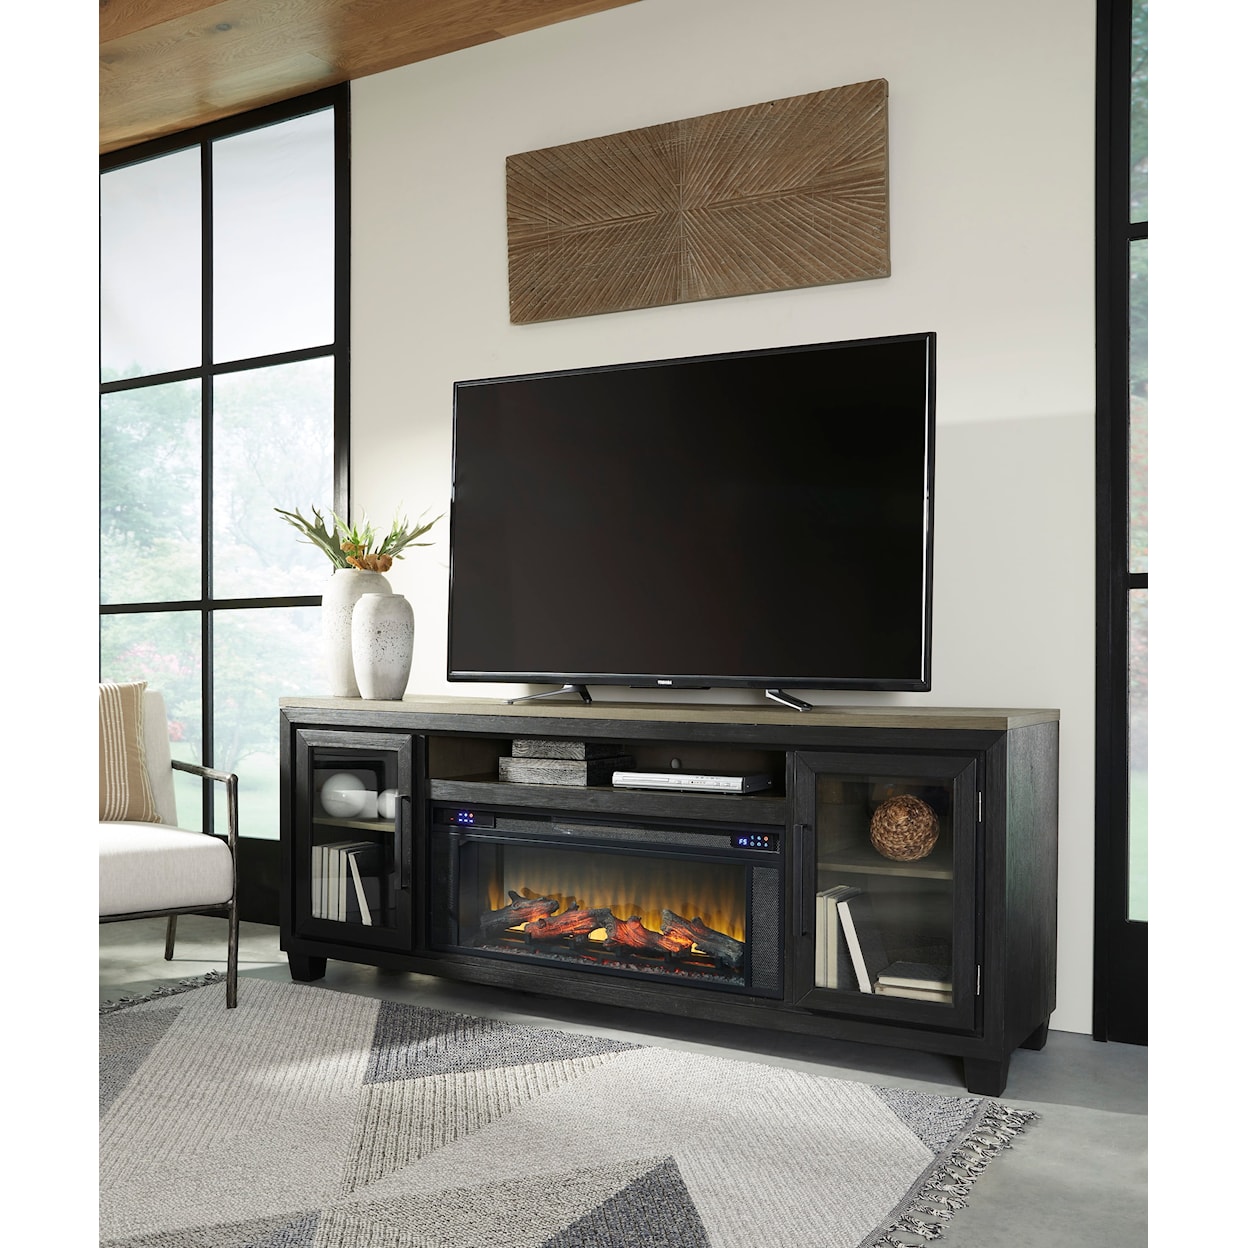 Signature Design by Ashley Furniture Foyland 83" TV Stand with Electric Fireplace